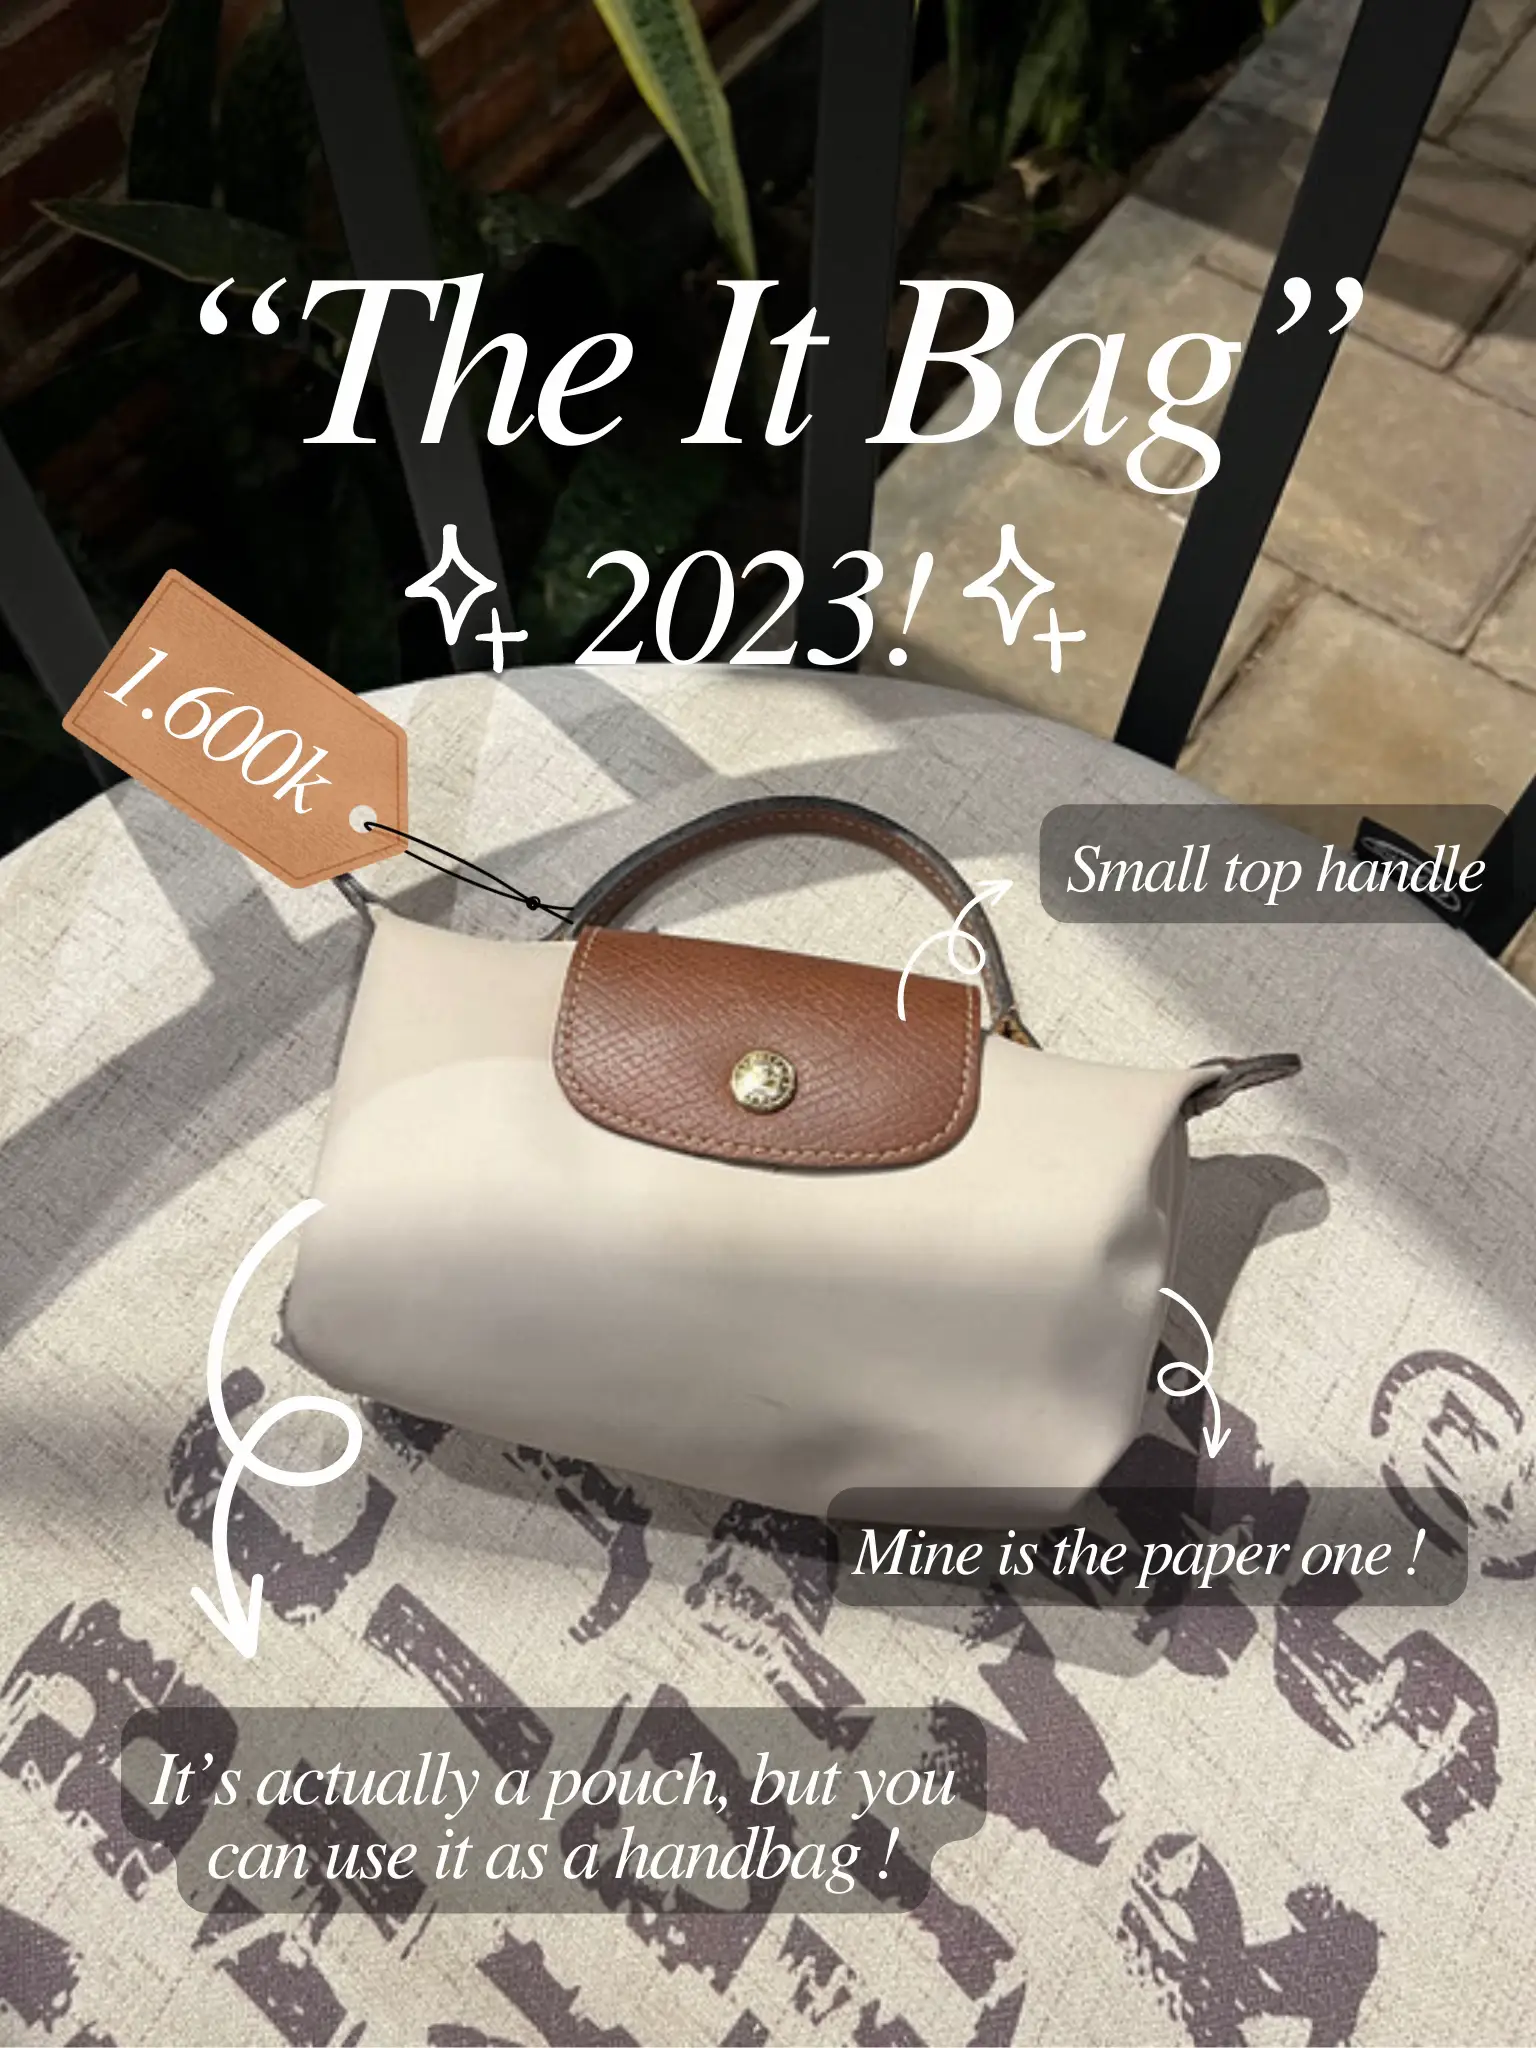 I TURNED THIS LONGCHAMP POUCH INTO A MINI CROSSBODY BAG in 2023